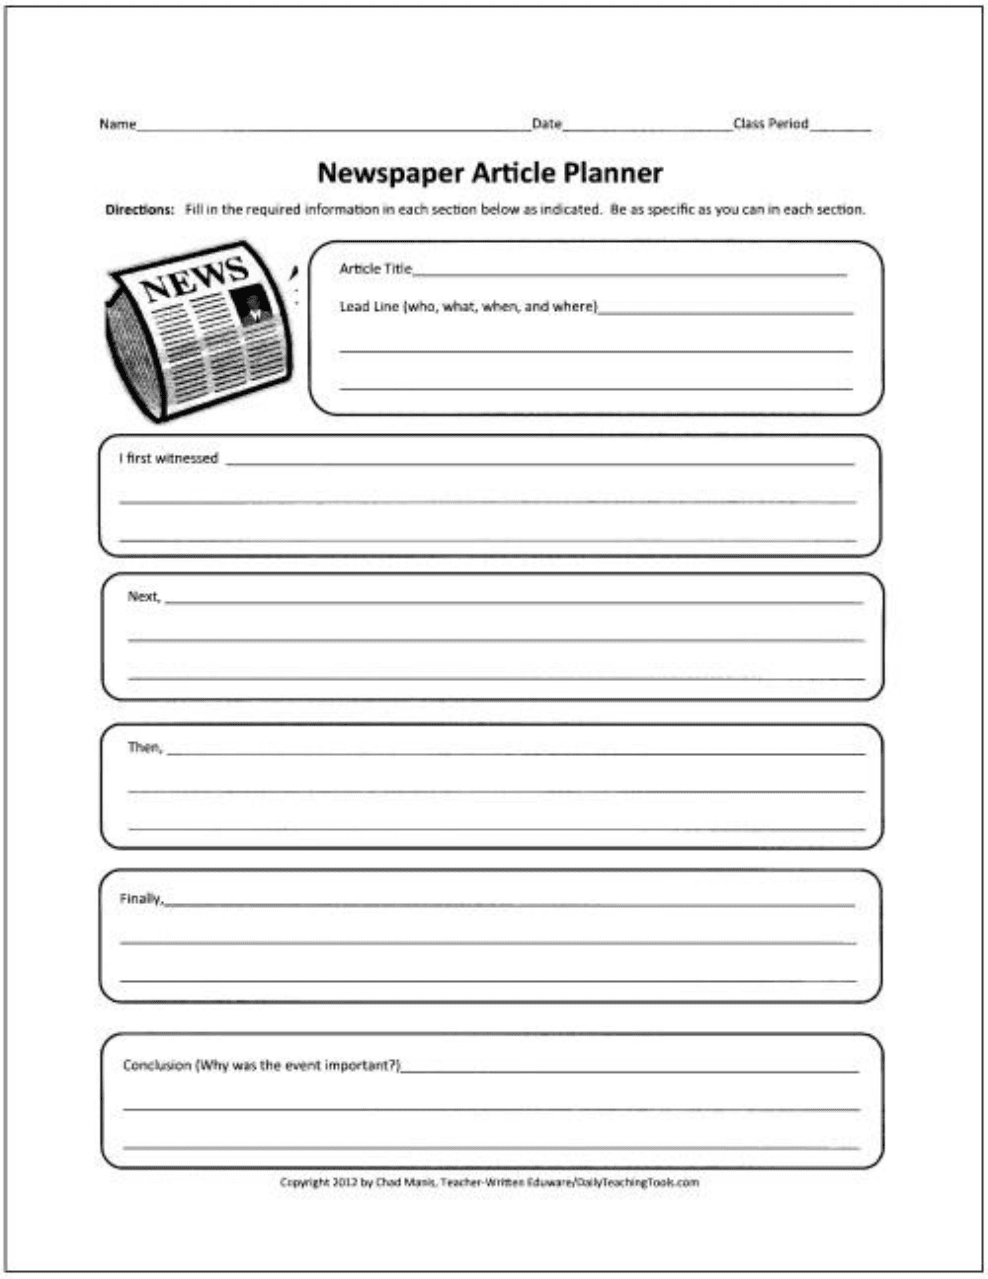 Newspaper template in Word and Pdf formats page 3 of 4